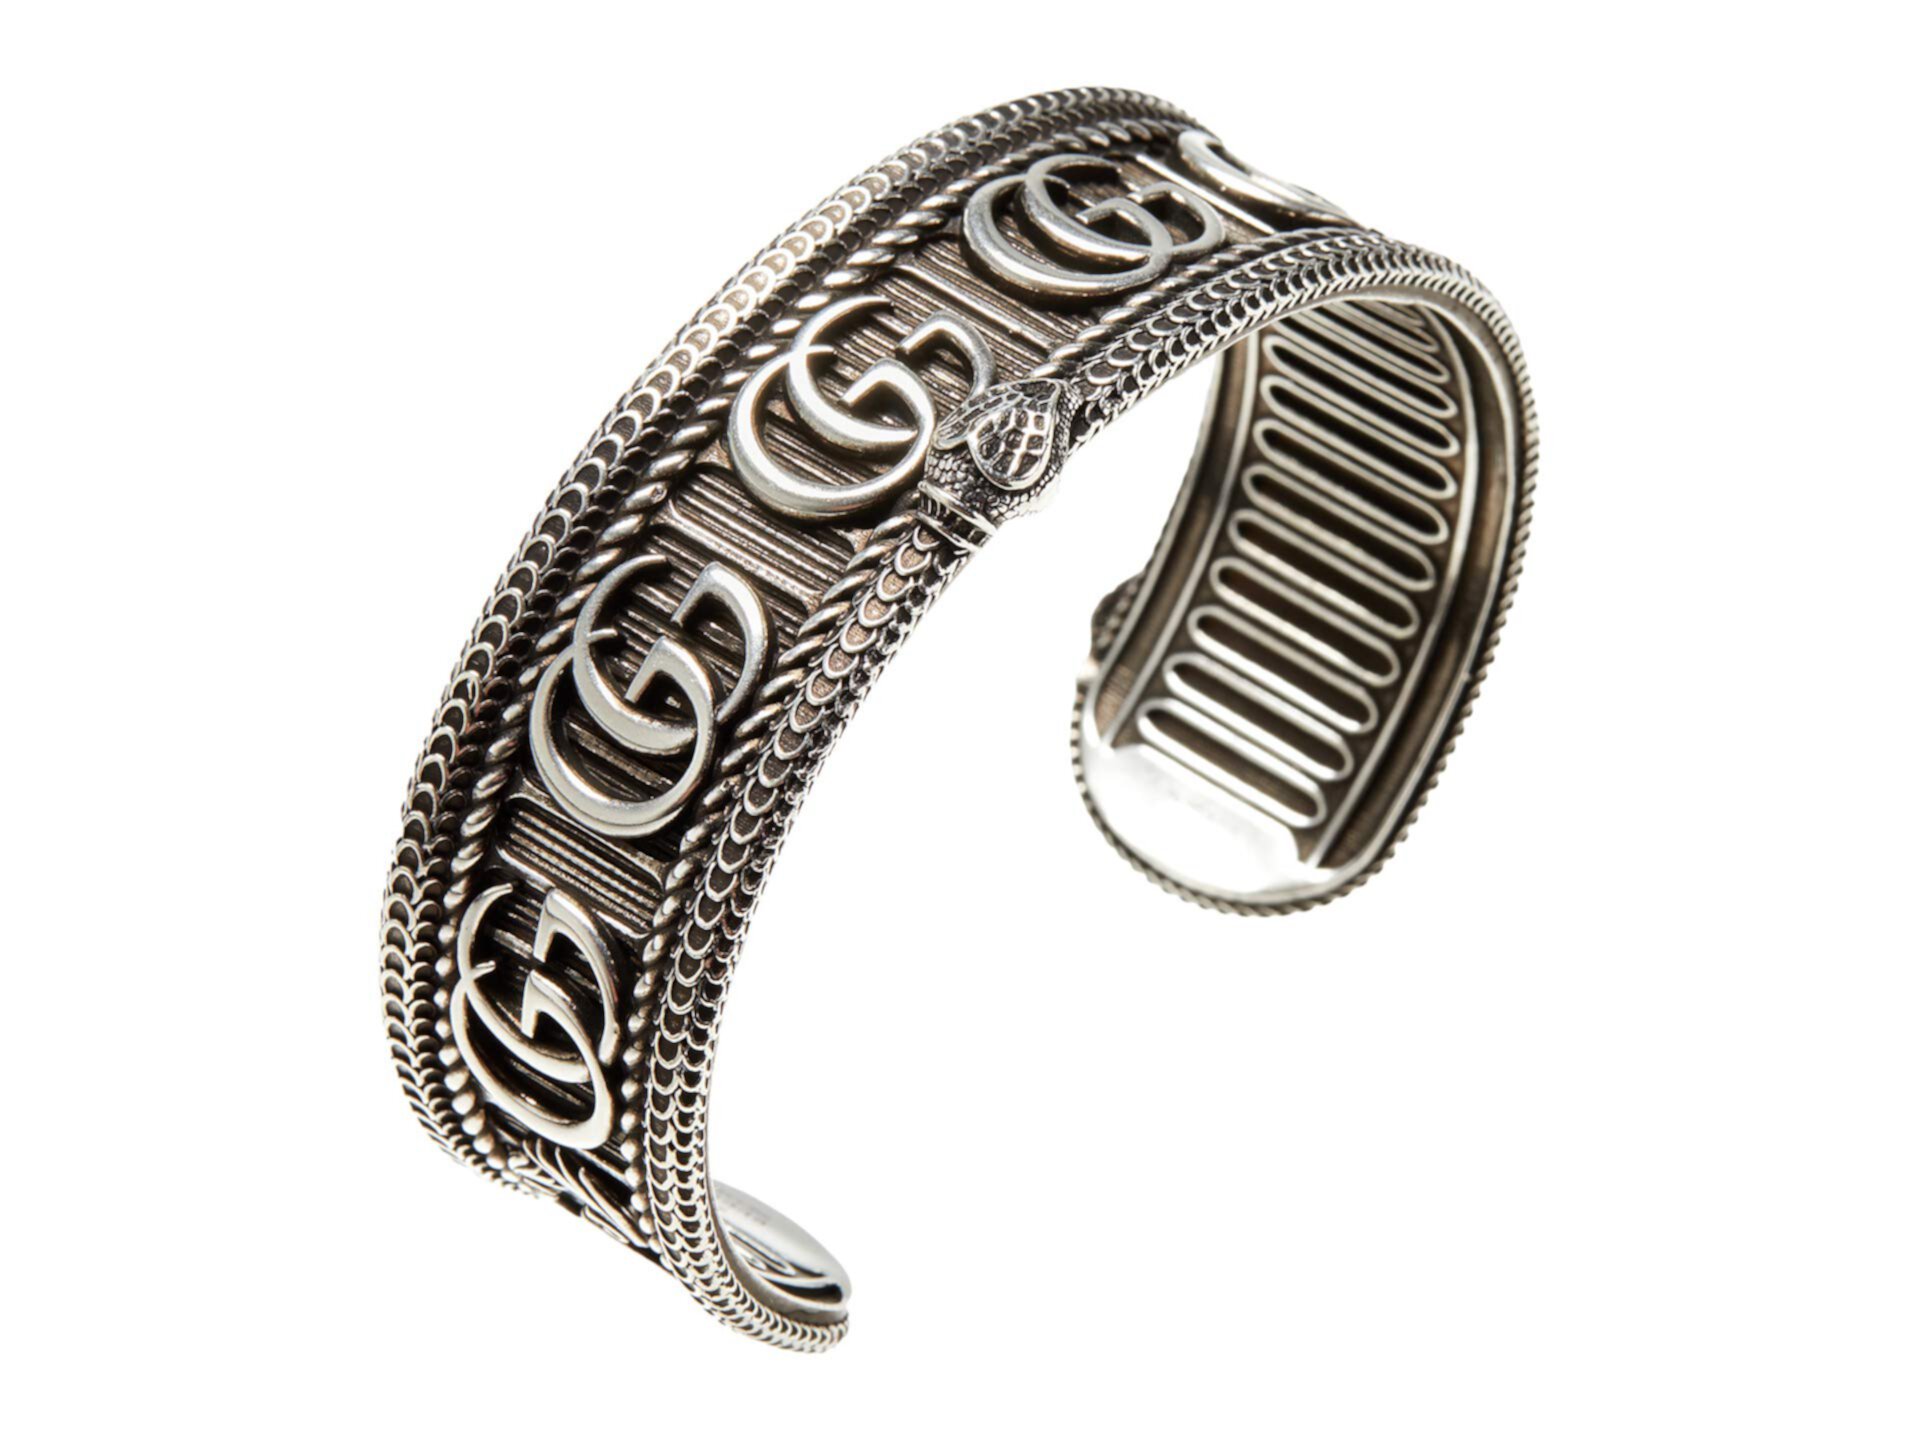 Double G and Snake Motif Bracelet in Aged Sterling Silver GUCCI